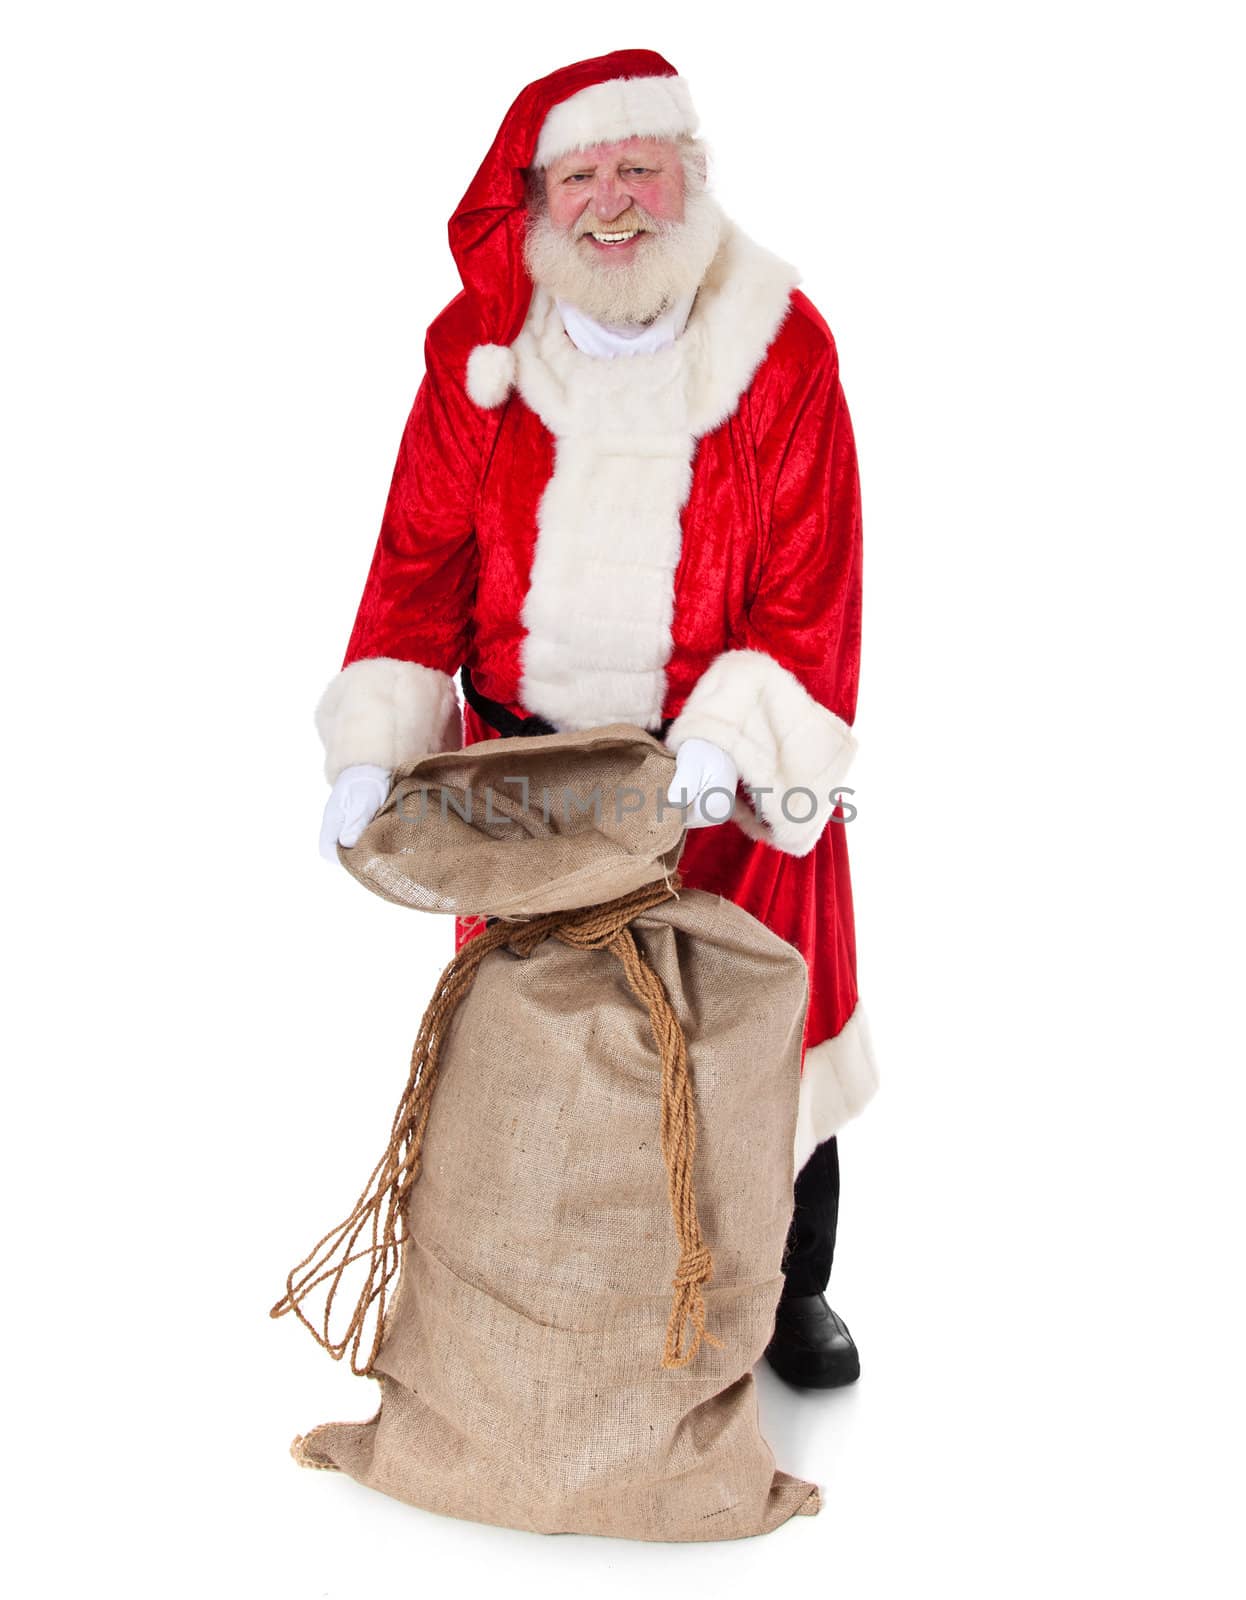 Santa Claus in authentic look opening his bag of presents. All on white background.